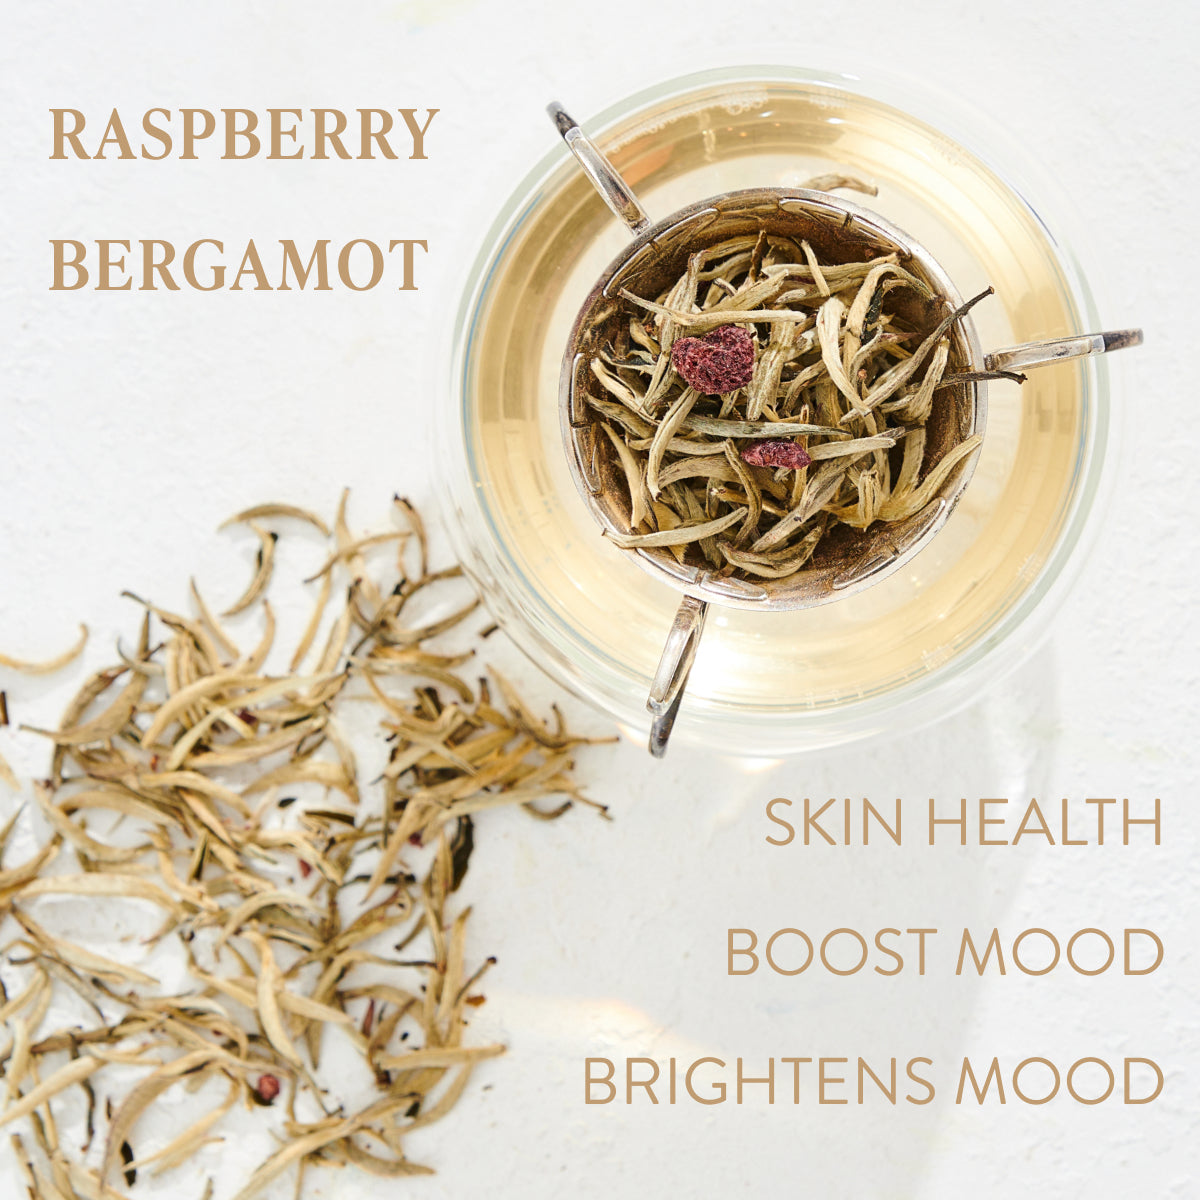 A glass cup of Raspberry Earl White Tea is shown from above, with loose leaf tea arranged around the cup. Beige text on the image reads "Raspberry Earl White Tea" and highlights benefits: "Skin Health," "Boost Mood," and "Brightens Mood." Enjoy this Club Magic Hour blend for a refreshing experience.